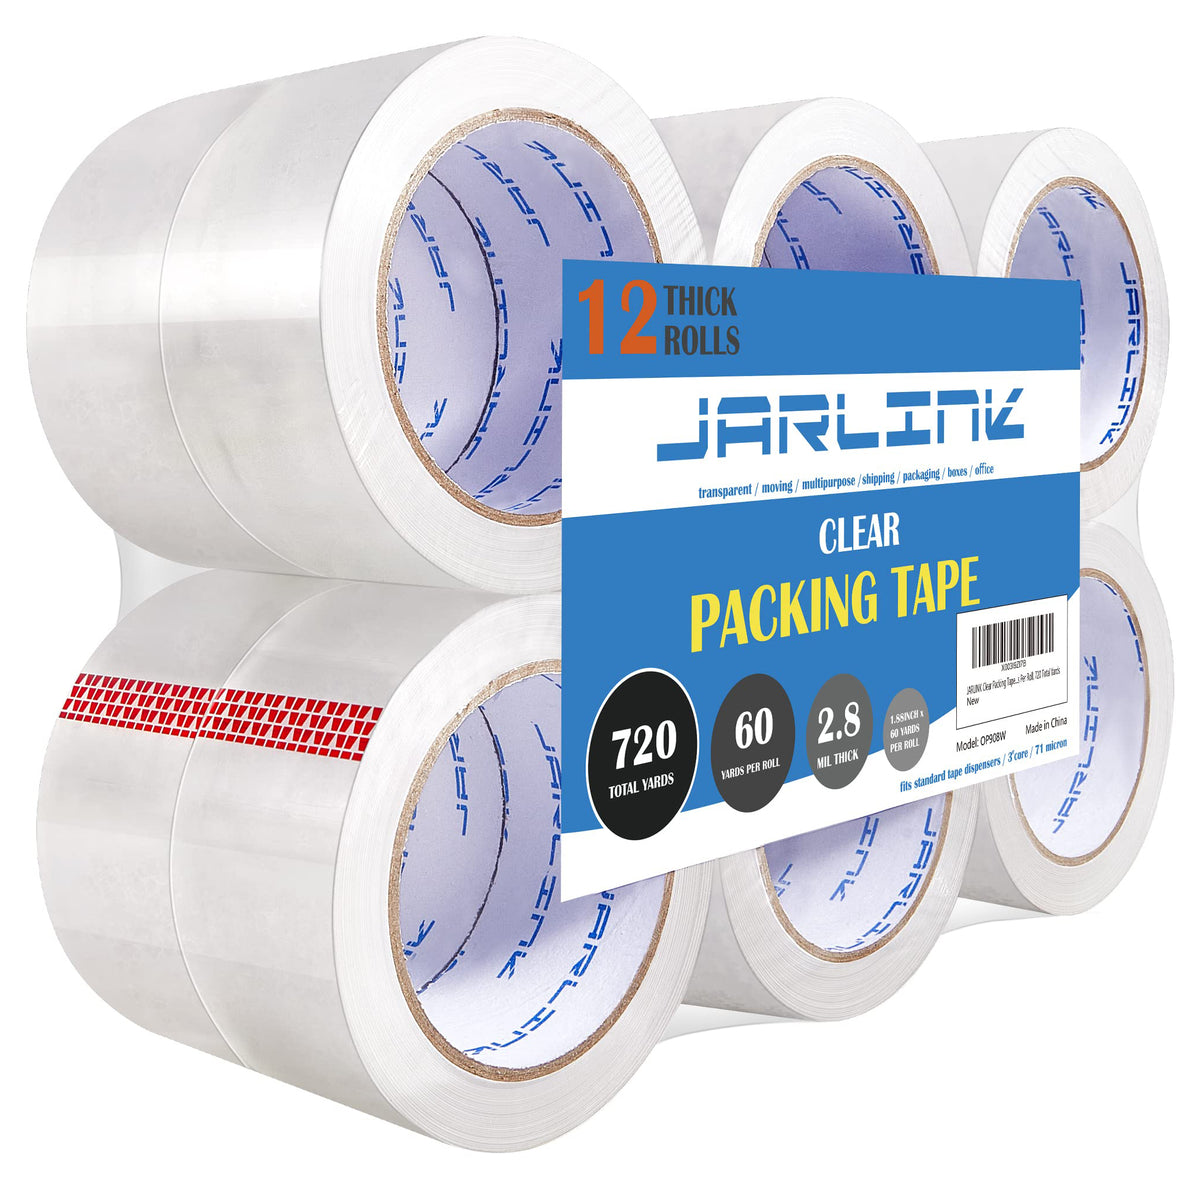 JARLINK Clear Packing Tape (12 Rolls), Heavy Duty Packaging Tape for Shipping Packaging Moving Sealing, Stronger & Thicker 2.8mil, 1.88 inches Wide, 60 Yards Per Roll, 720 Total Yards